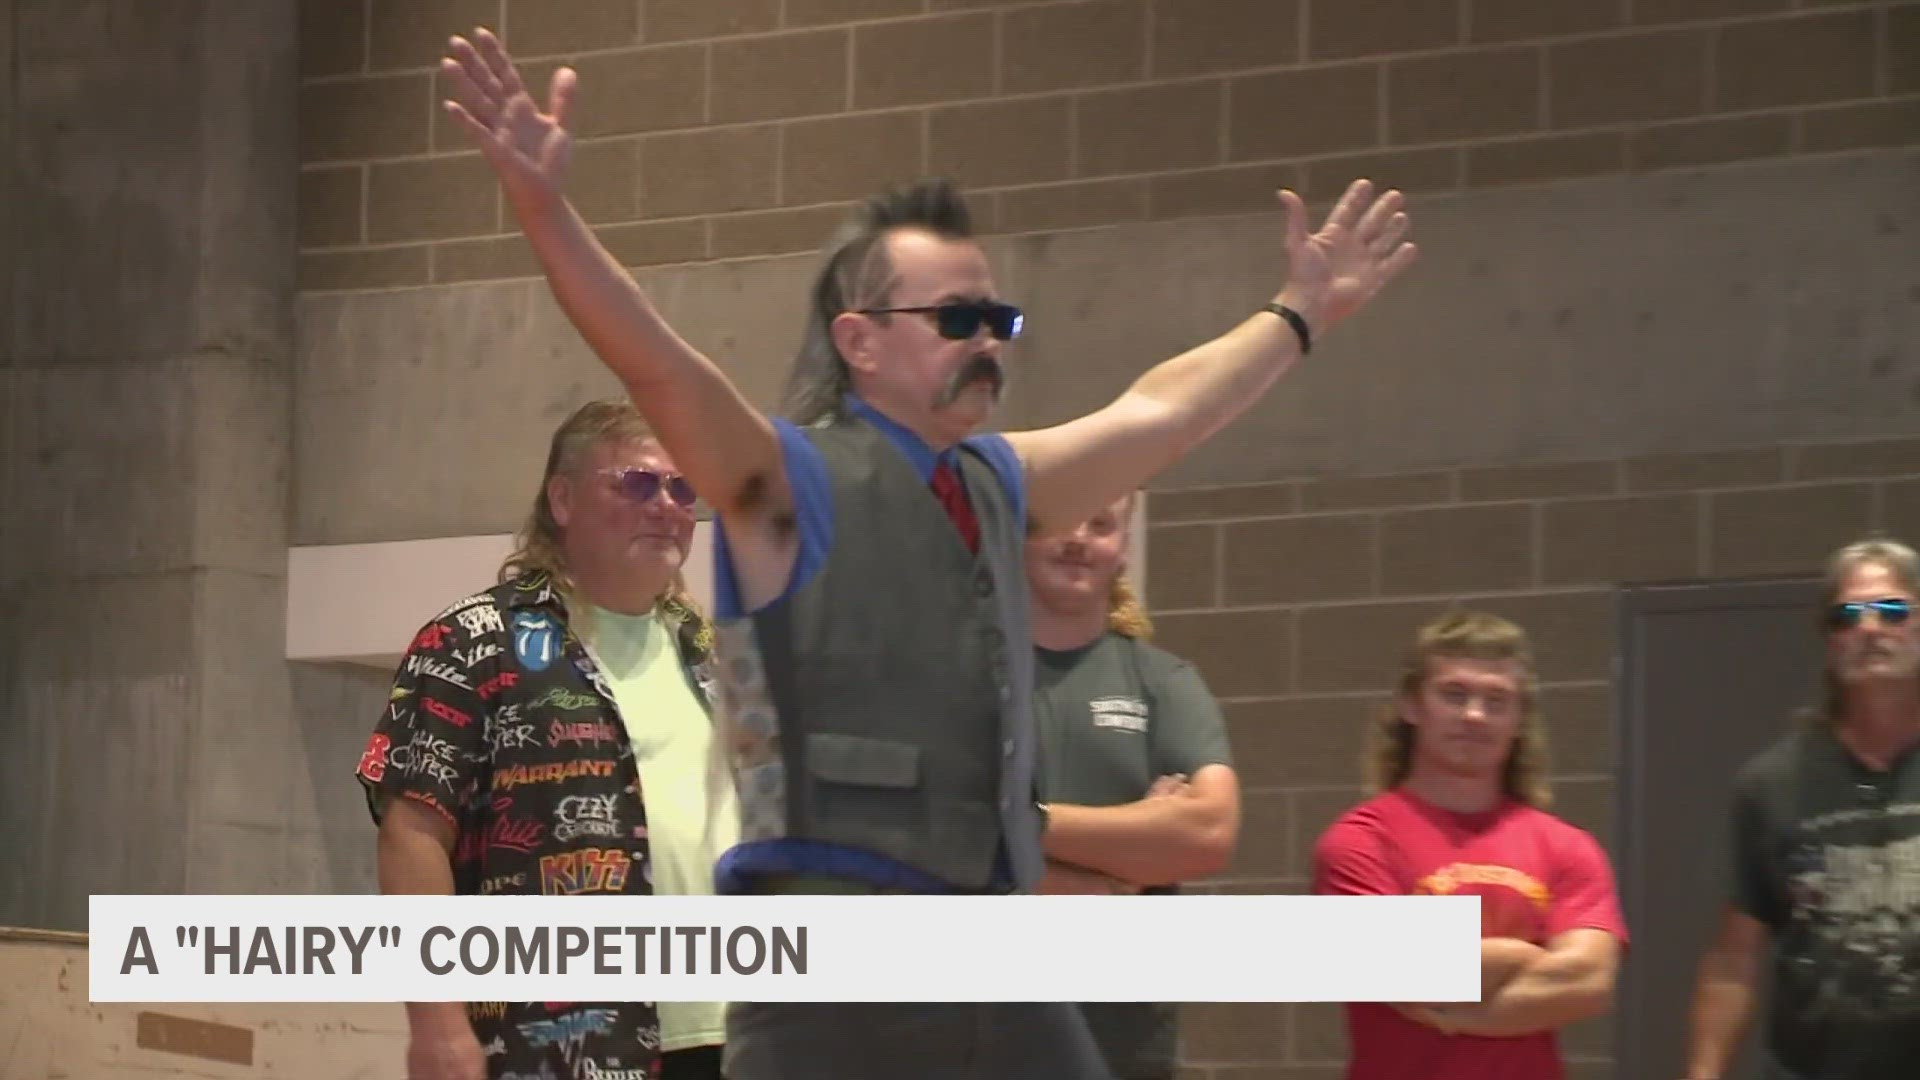 Kids and adults alike participated in mullet and mohawk competitions at the Iowa State Fair.